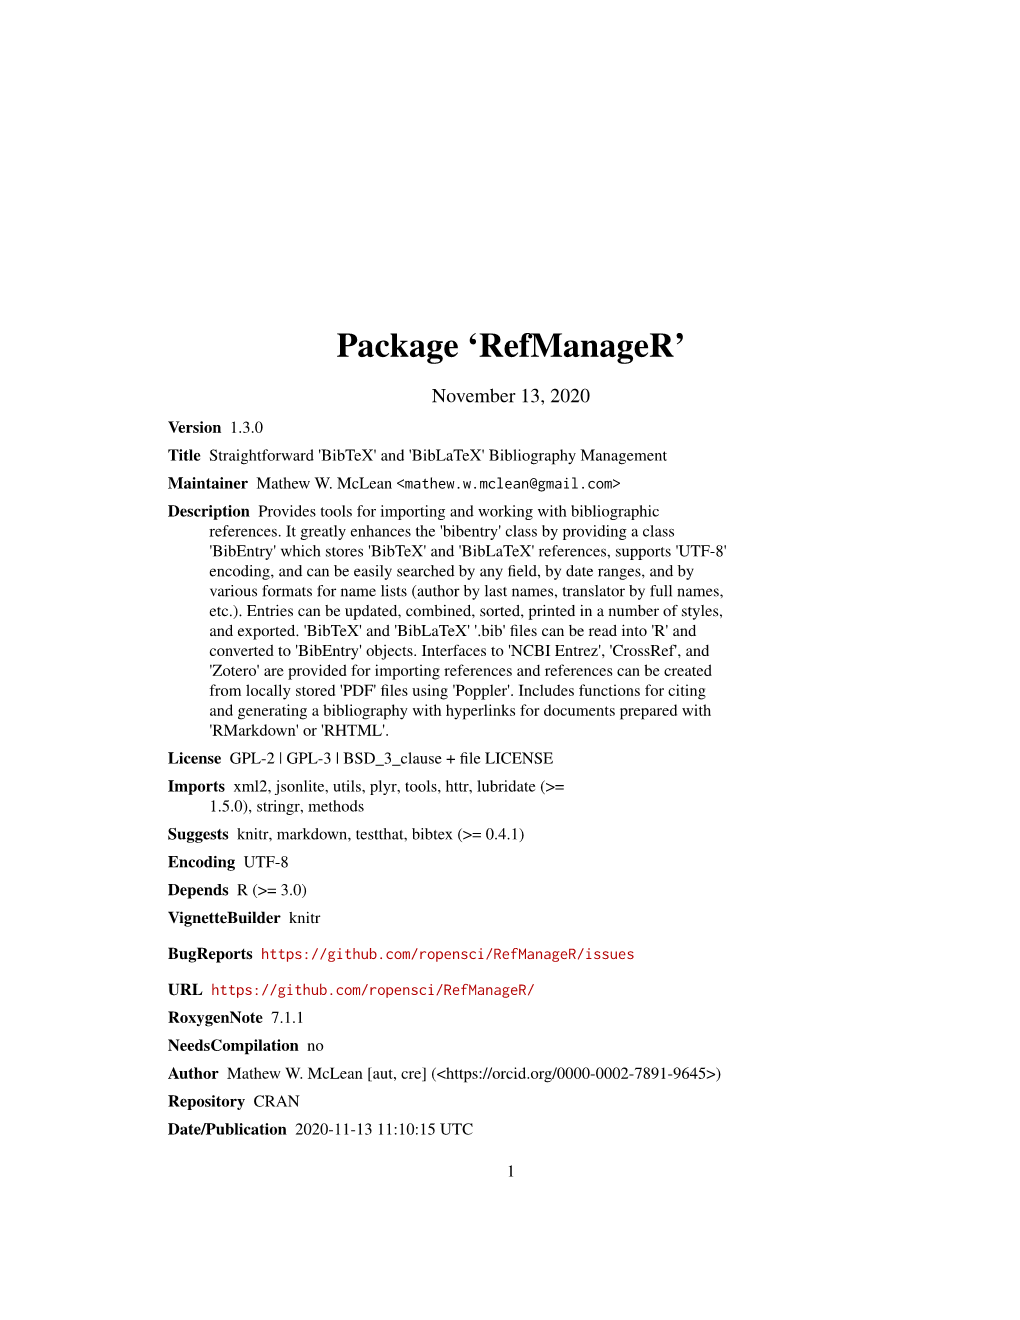 Package 'Refmanager'